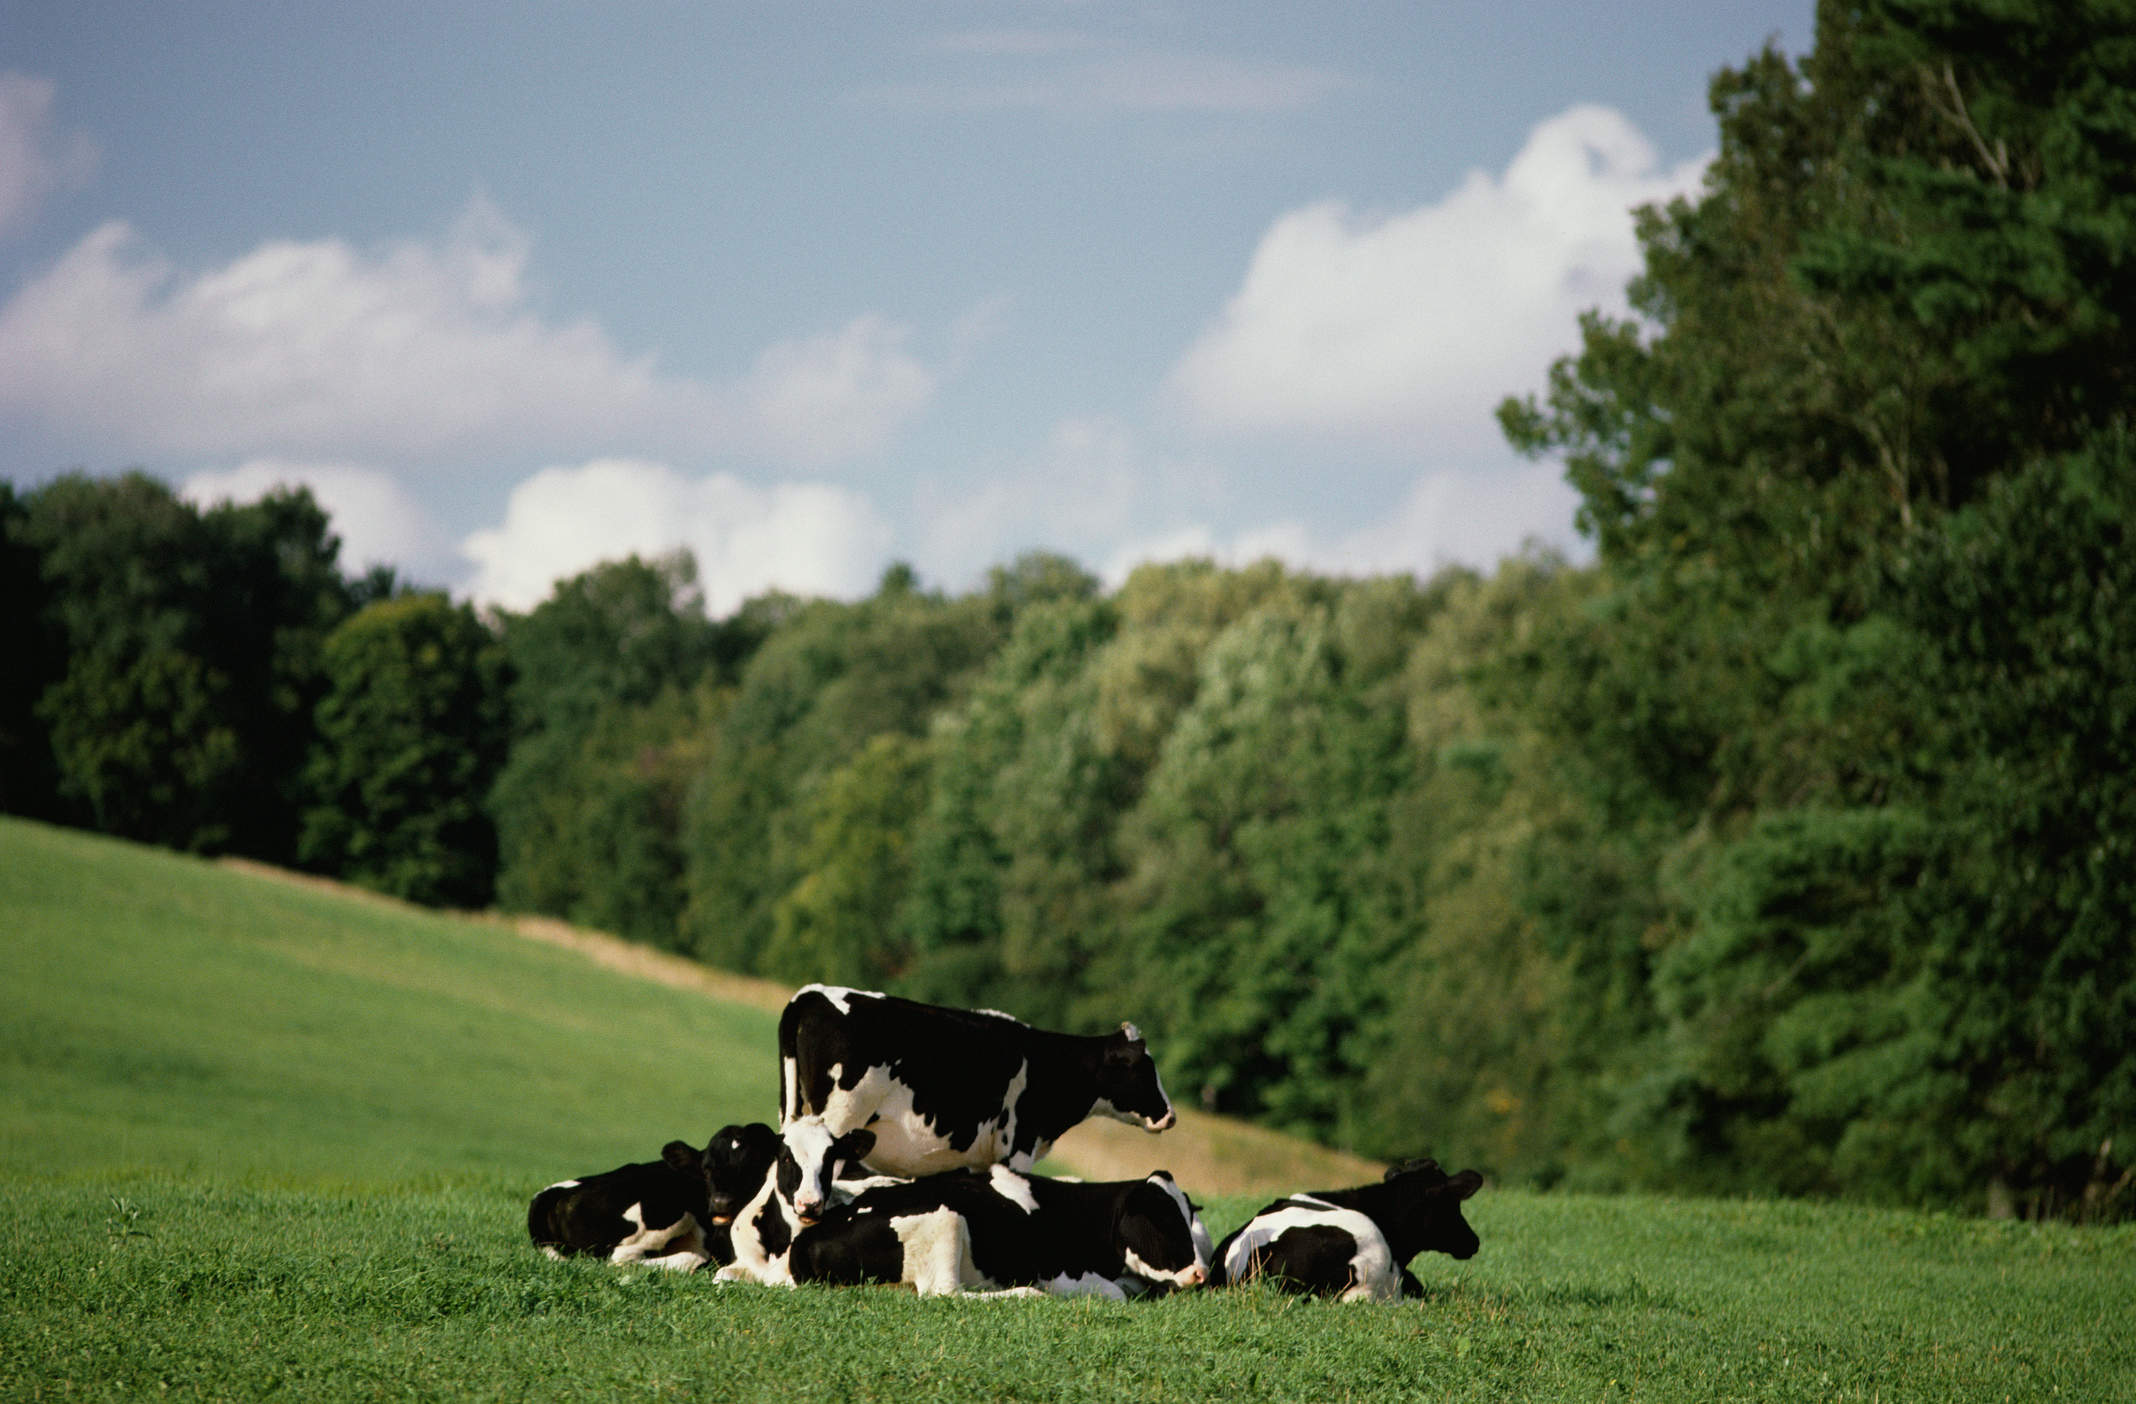 A group of dairy cows resting in a field of grass bordered with trees.